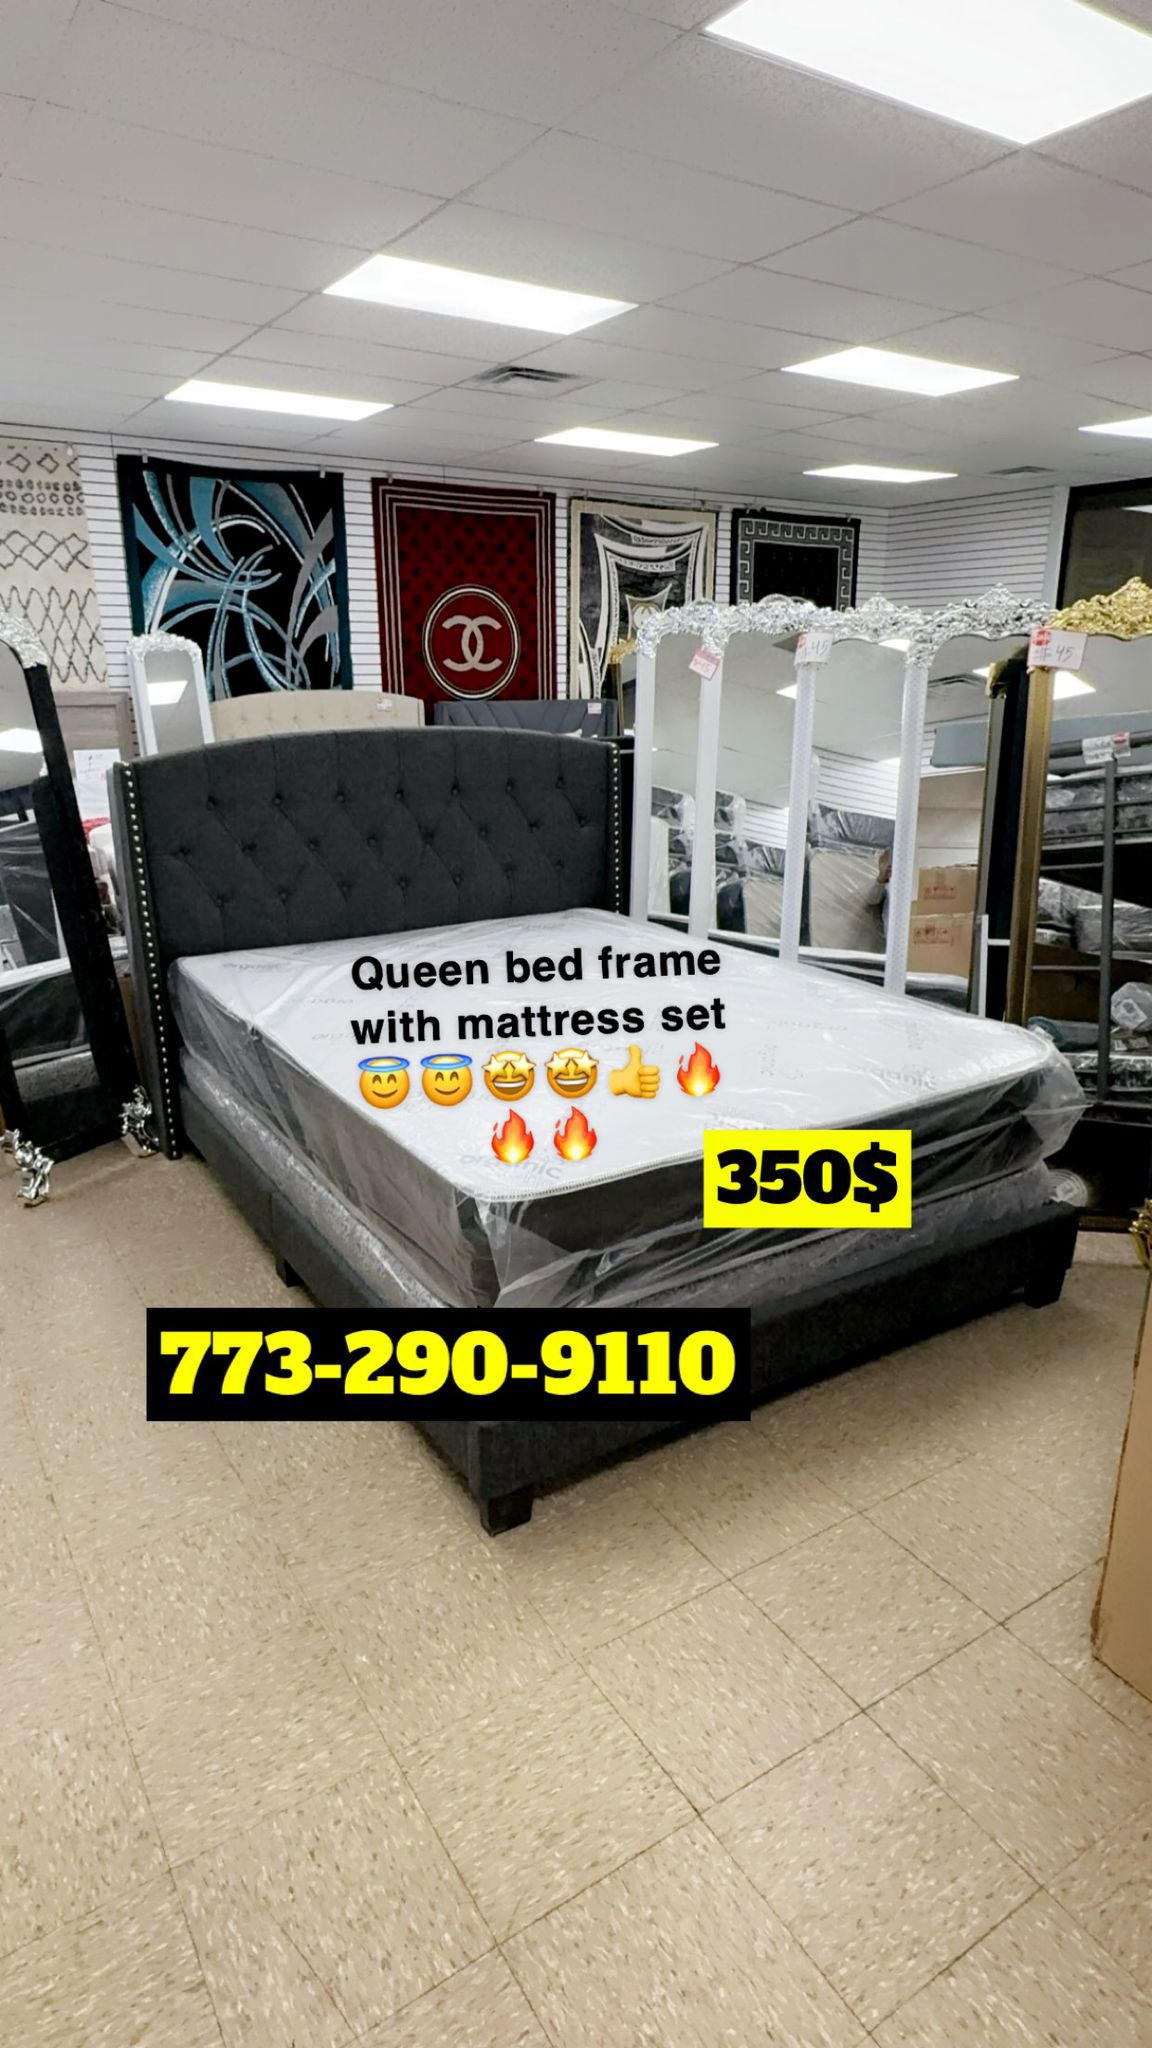 Queen Size Bed Frame Headboard With Mattress And Box Spring $350 Only Complete Bed Ready For Delivery 